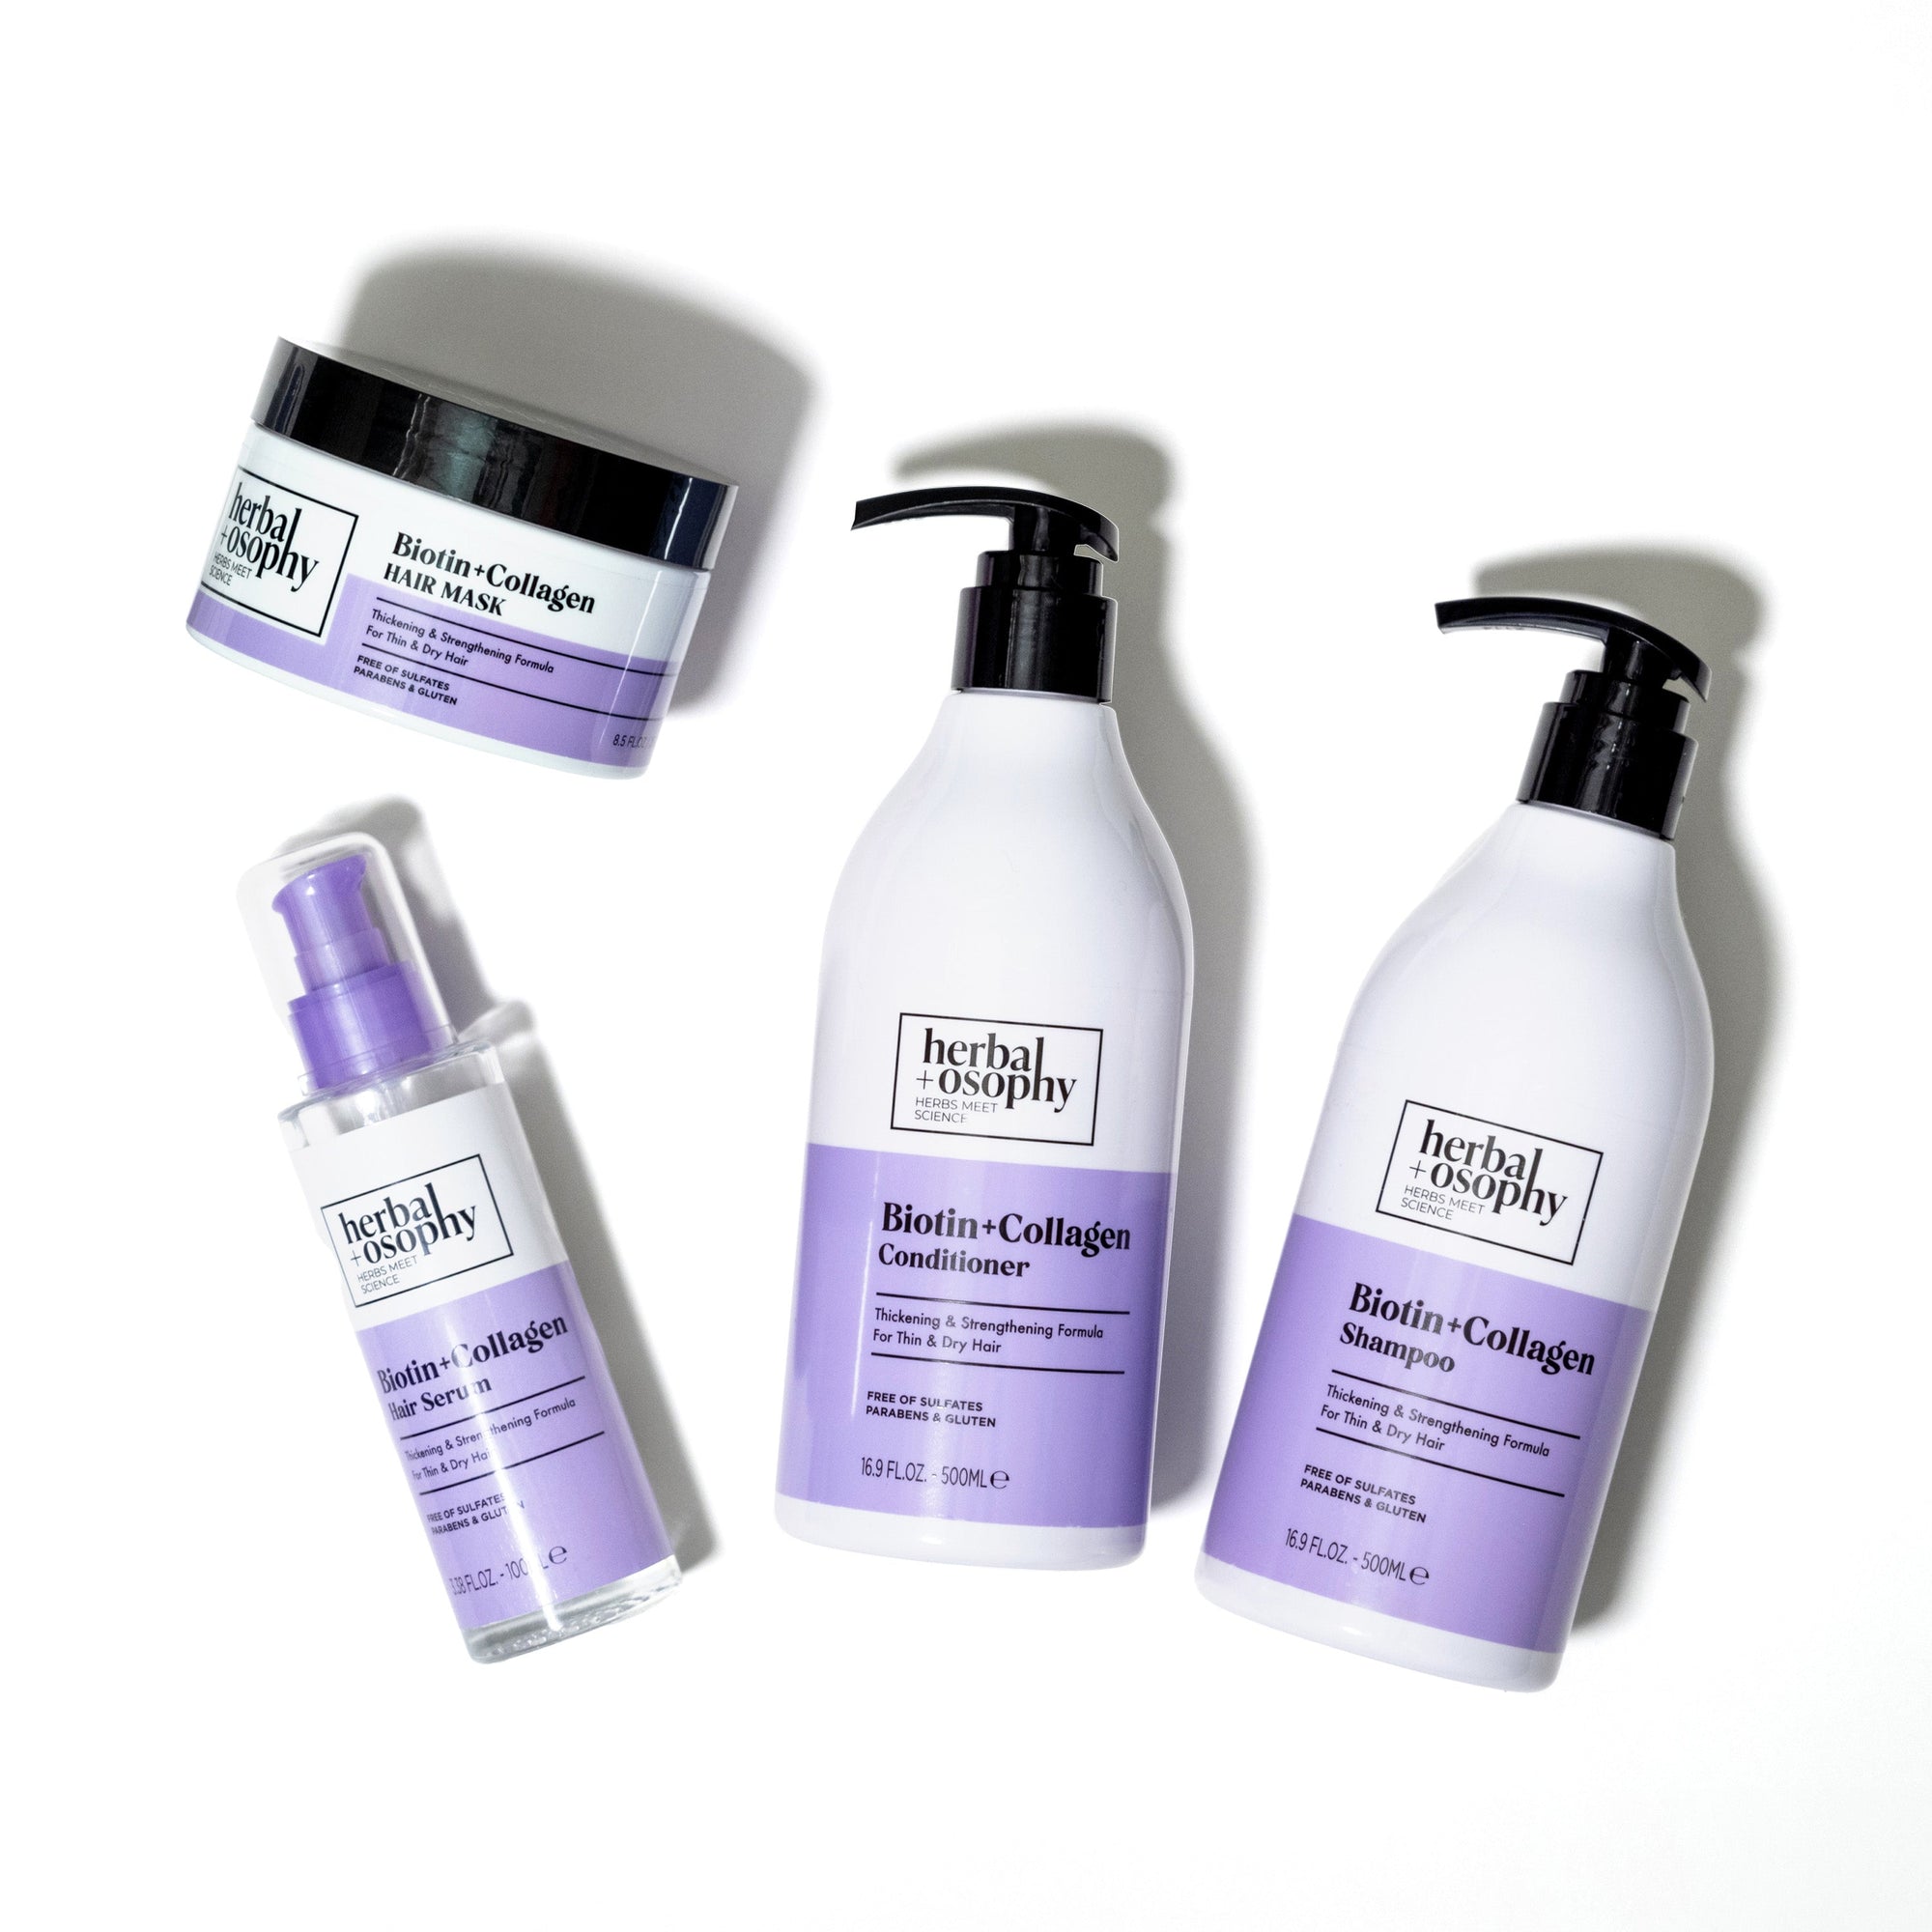 Herbalosophy Biotin + Collagen product series showing images of the Shampoo, Conditioner, Hair Mask and Serum